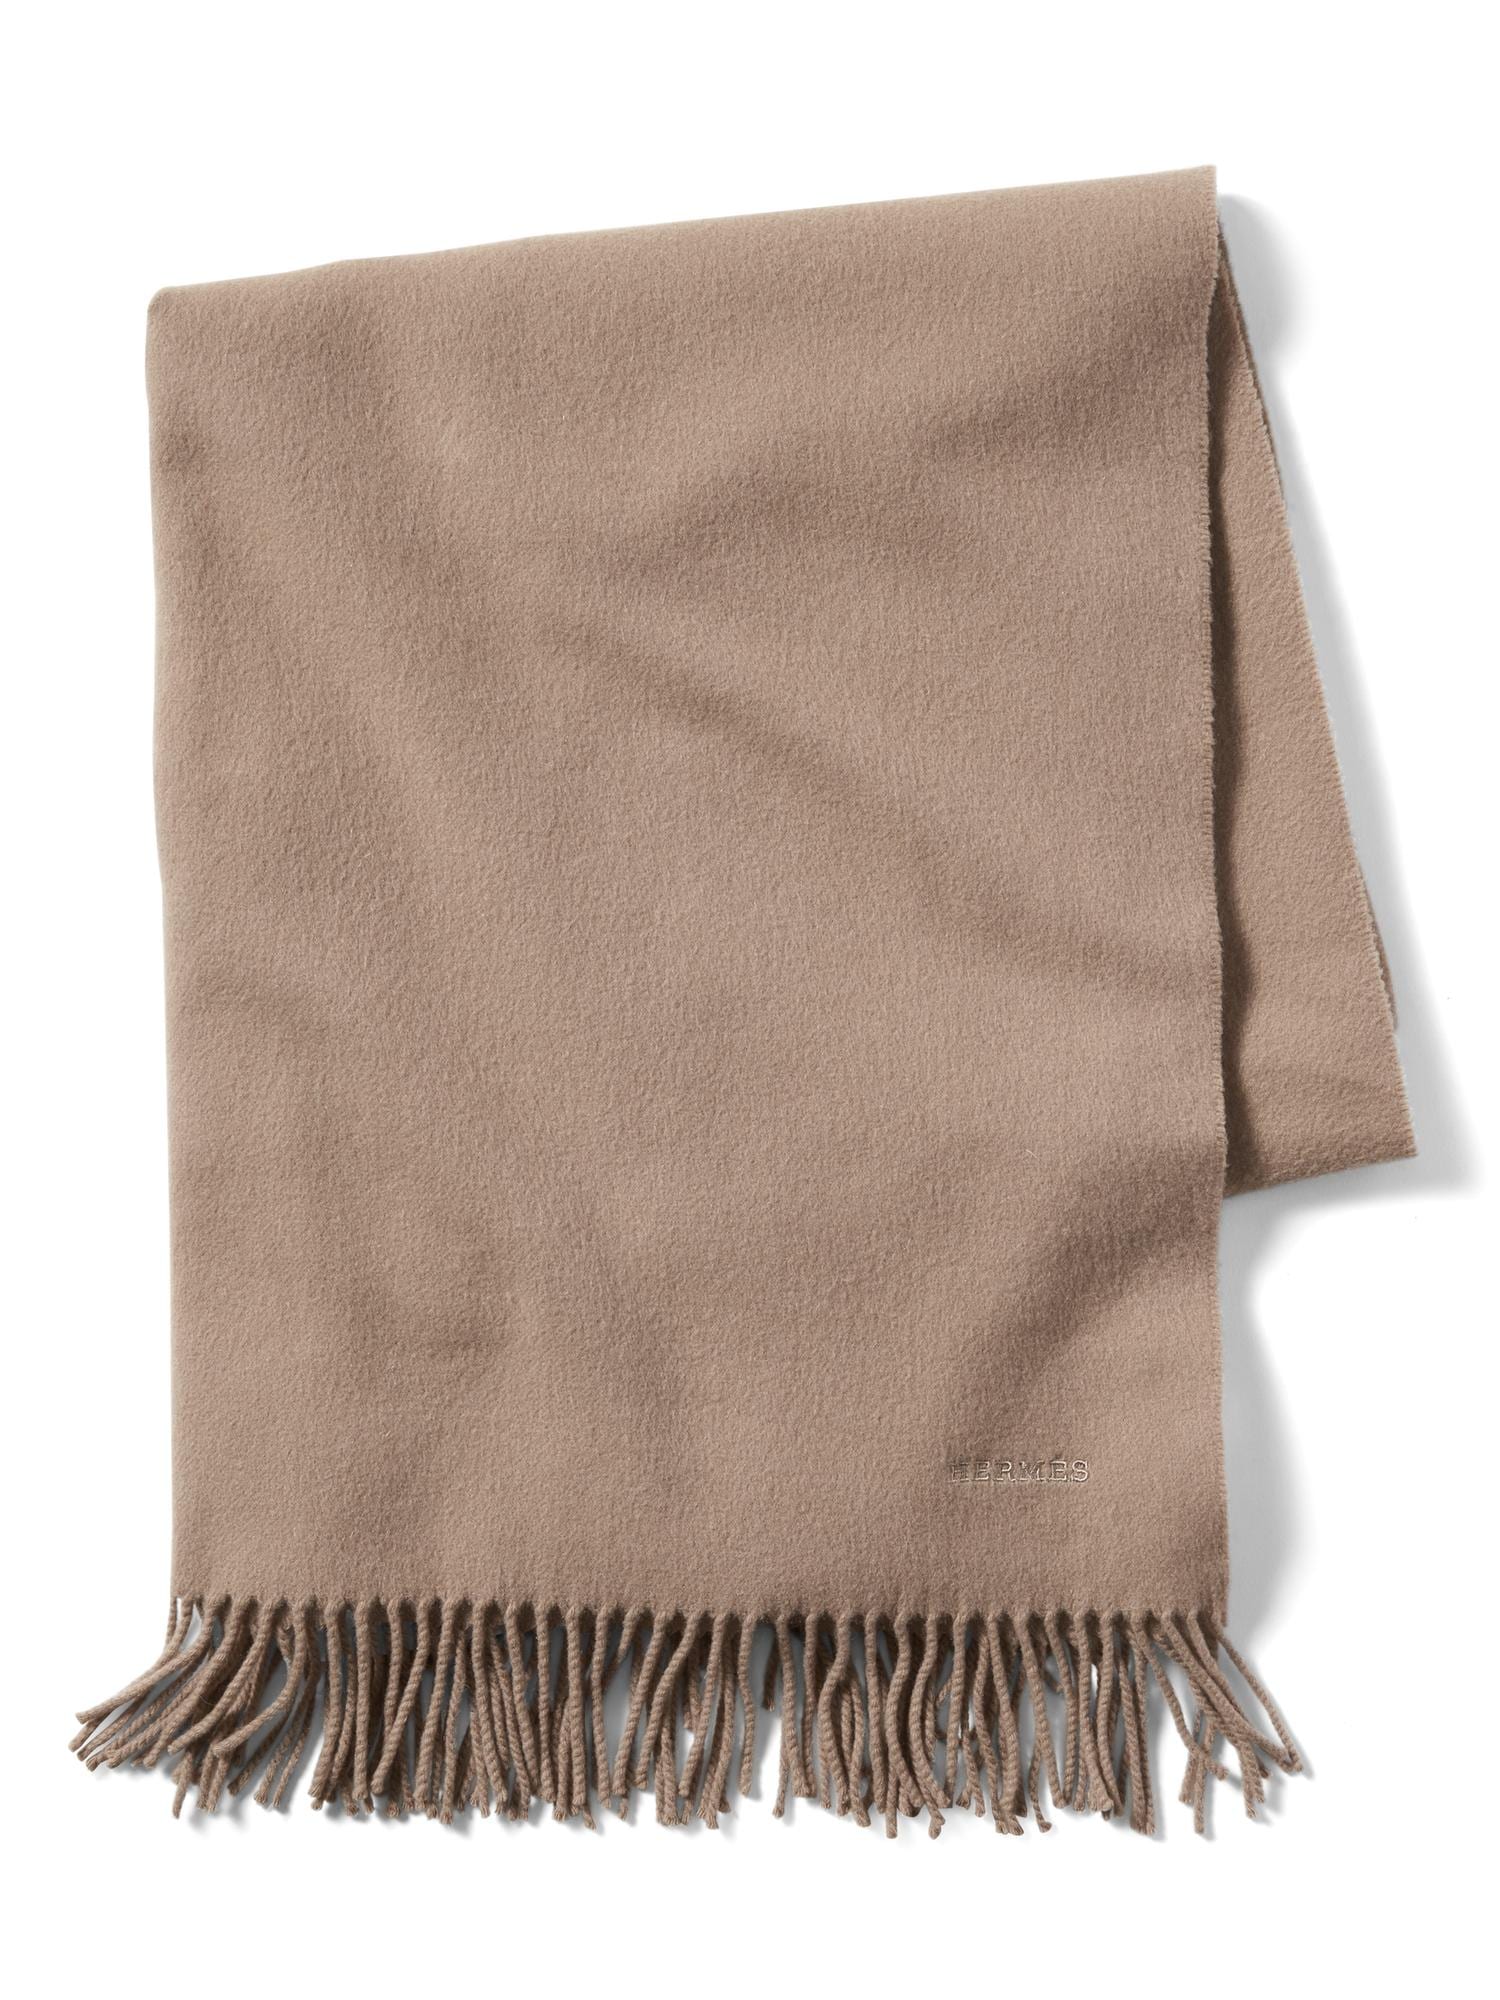 Luxe Finds Hermes Beige Cashmere Shawl